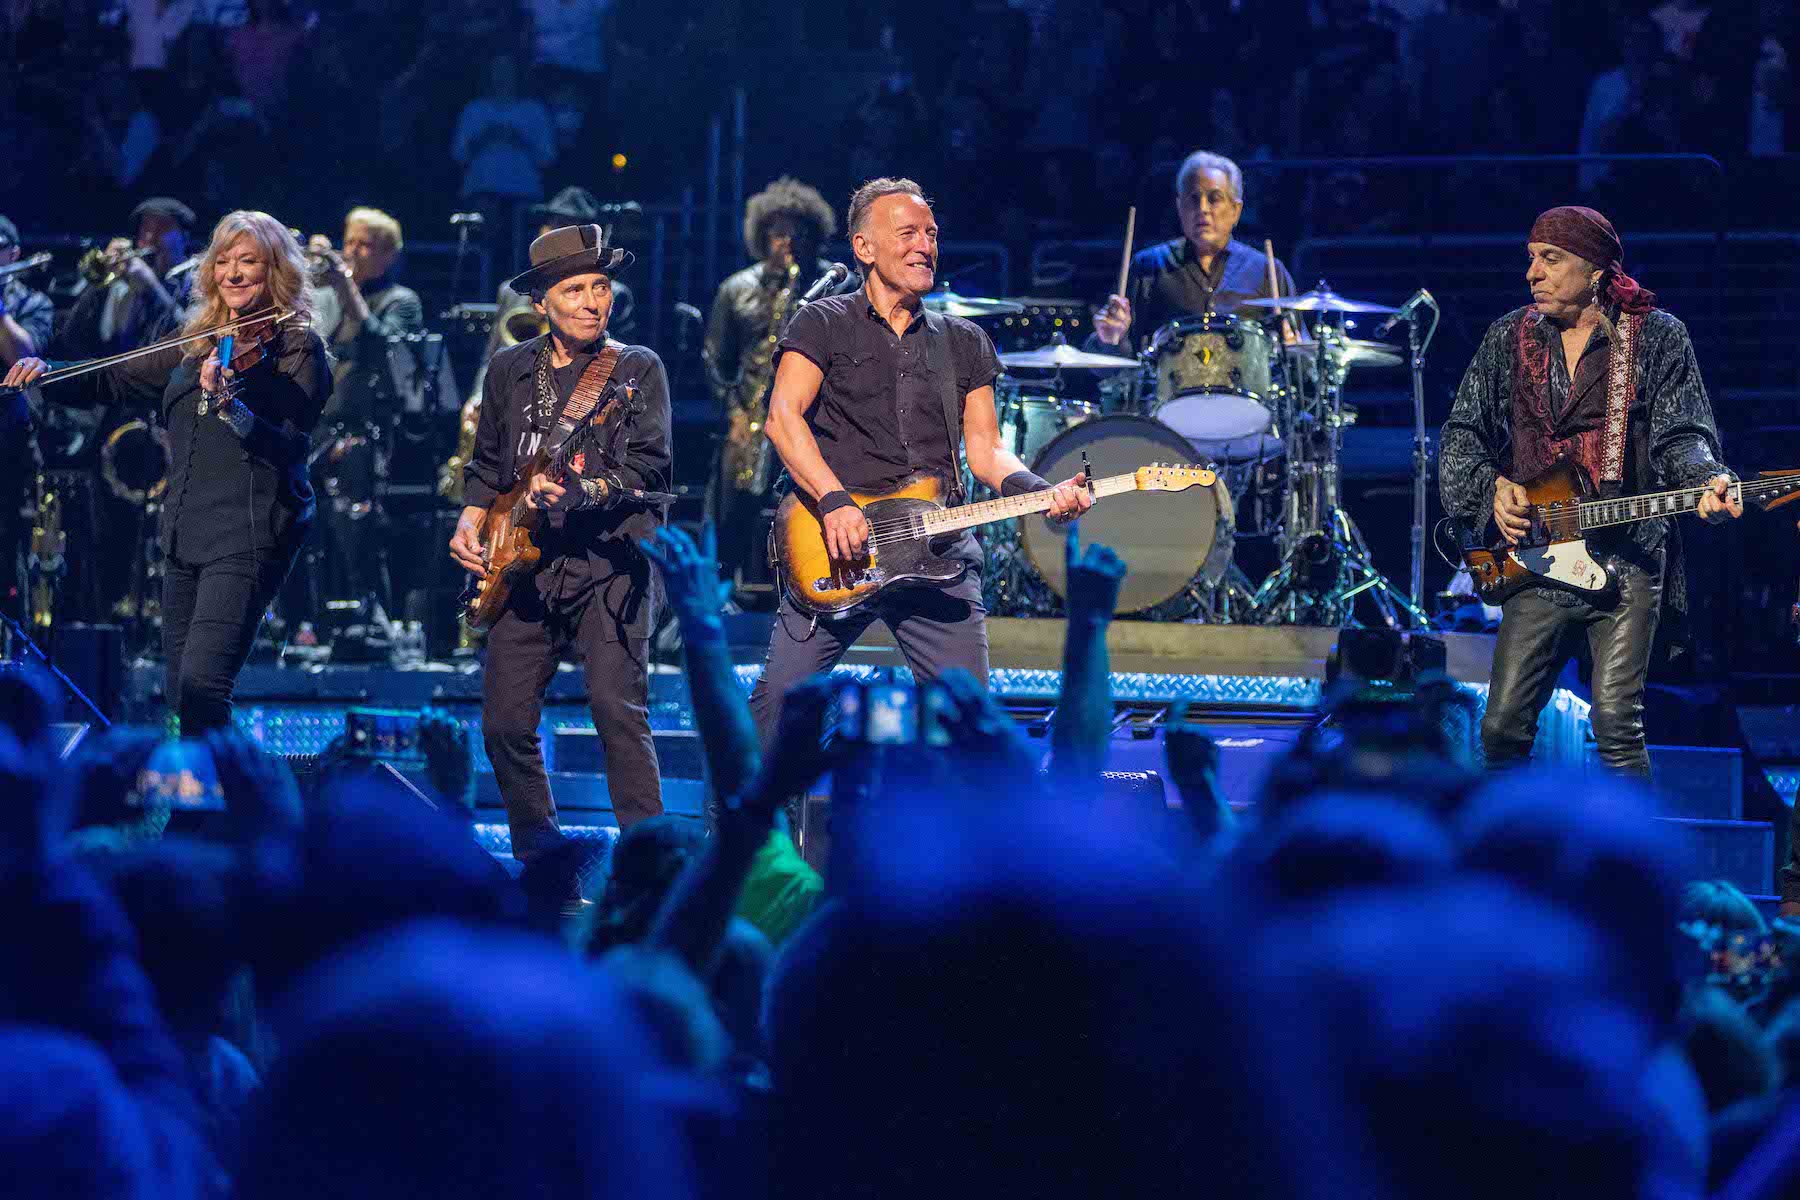 Bruce Springsteen & E Street Band at Capital One Arena, Washington, DC on March 27, 2023.